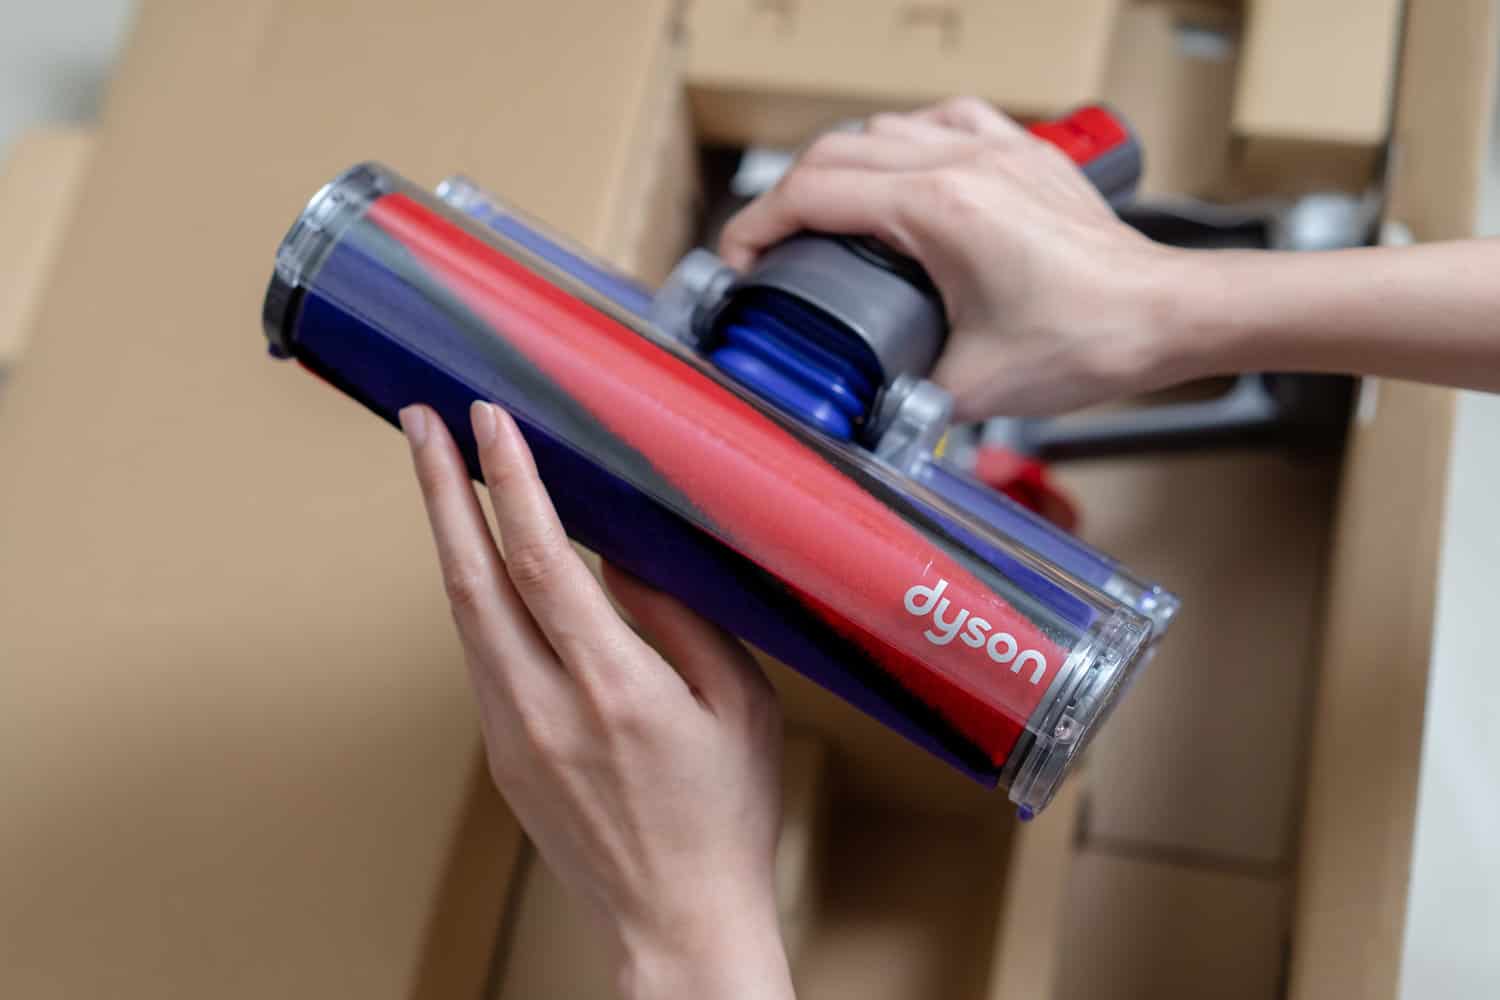 Lady’s hand holding the Soft roller cleaner head of the brand new Dyson Cyclone V10 Fluffy vacuum cleaner during open box